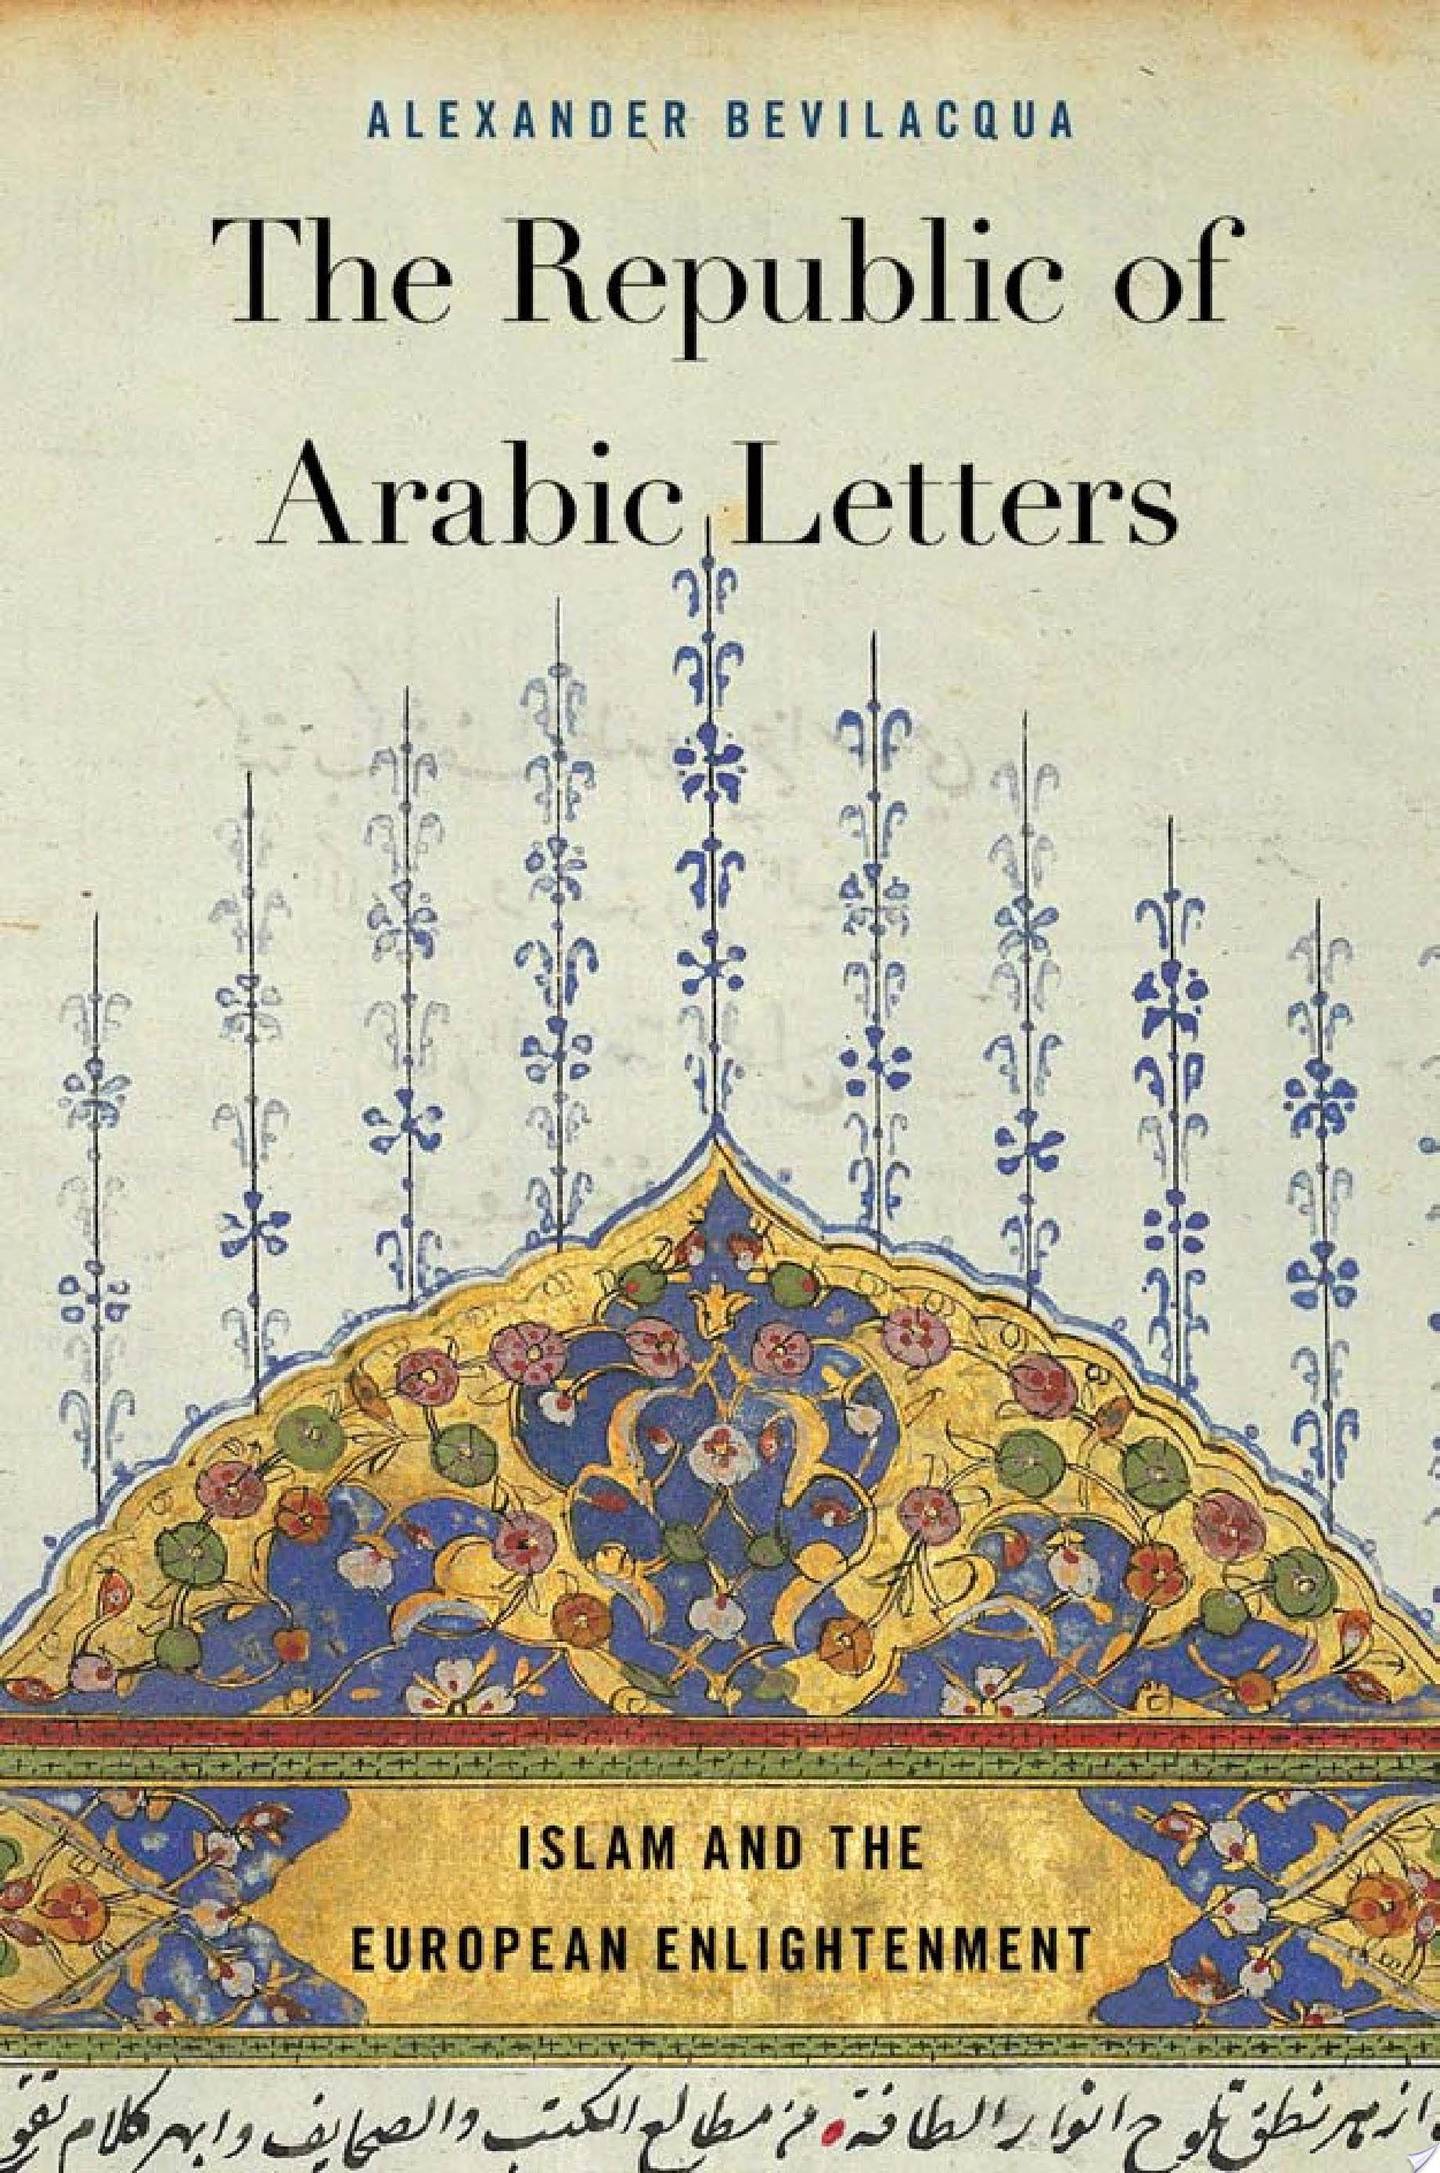 The Republic of Arabic Letters: Islam and the European Enlightenment by Alexander Bevilacqua. Courtesy Harvard University Press